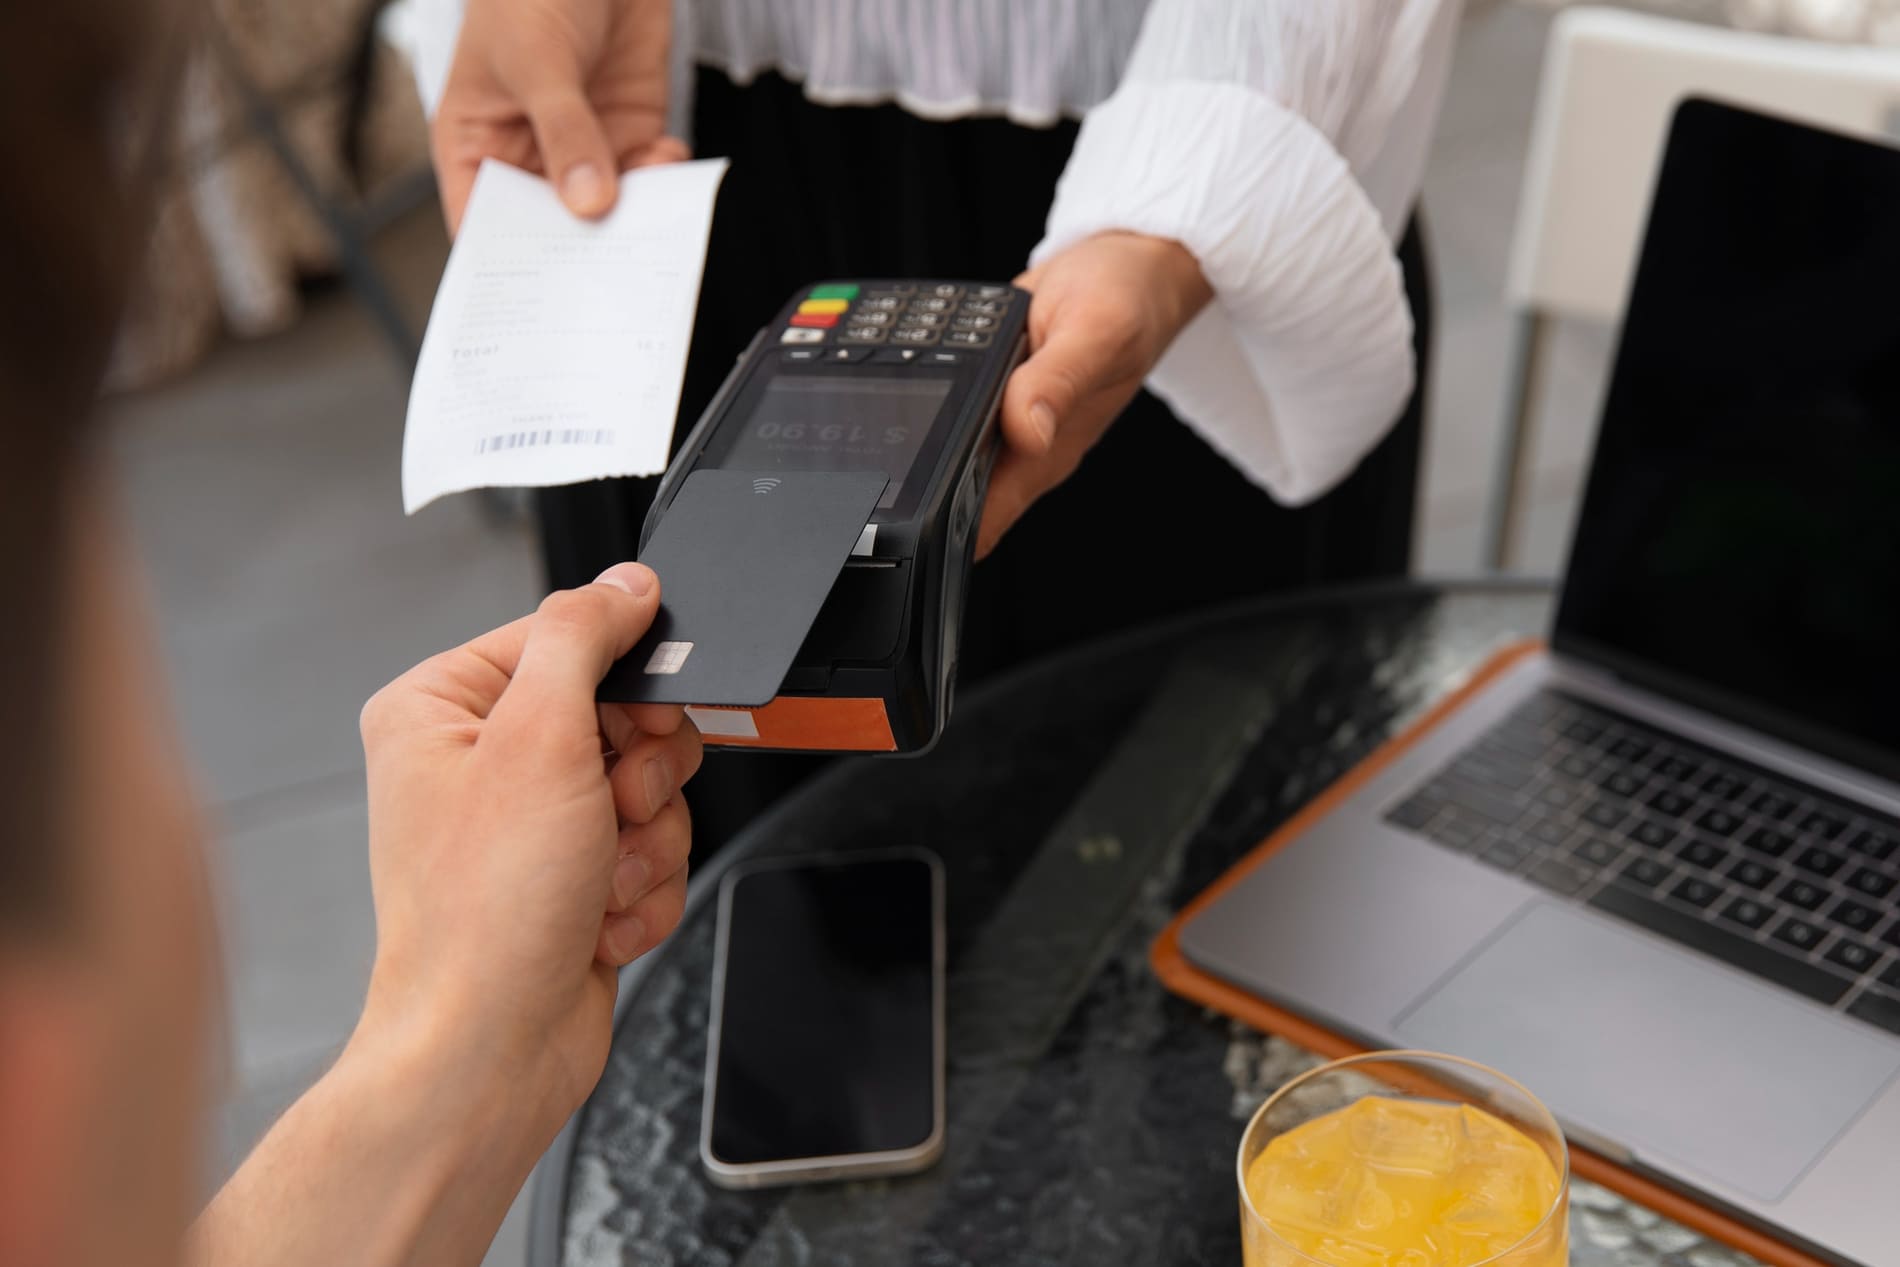 7 best Worldpay POS to speed up checkout and sync data in real time